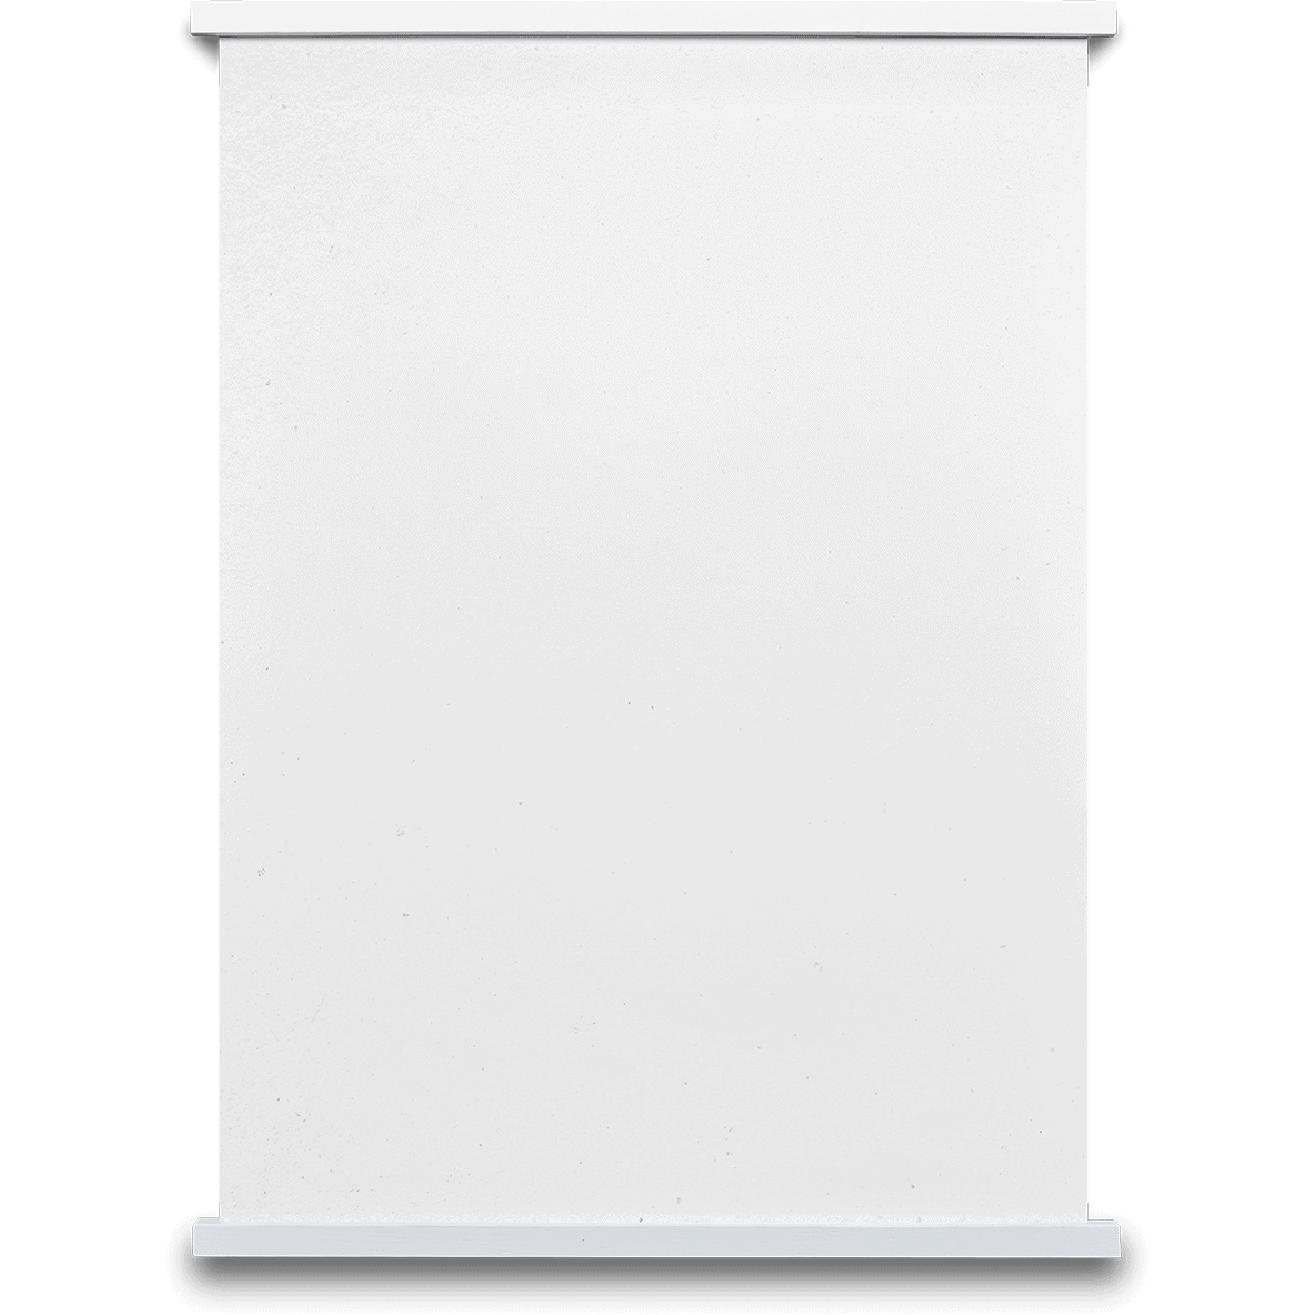 Paper Collective S Tii Cks 53 Magnetic Poster Bar, White